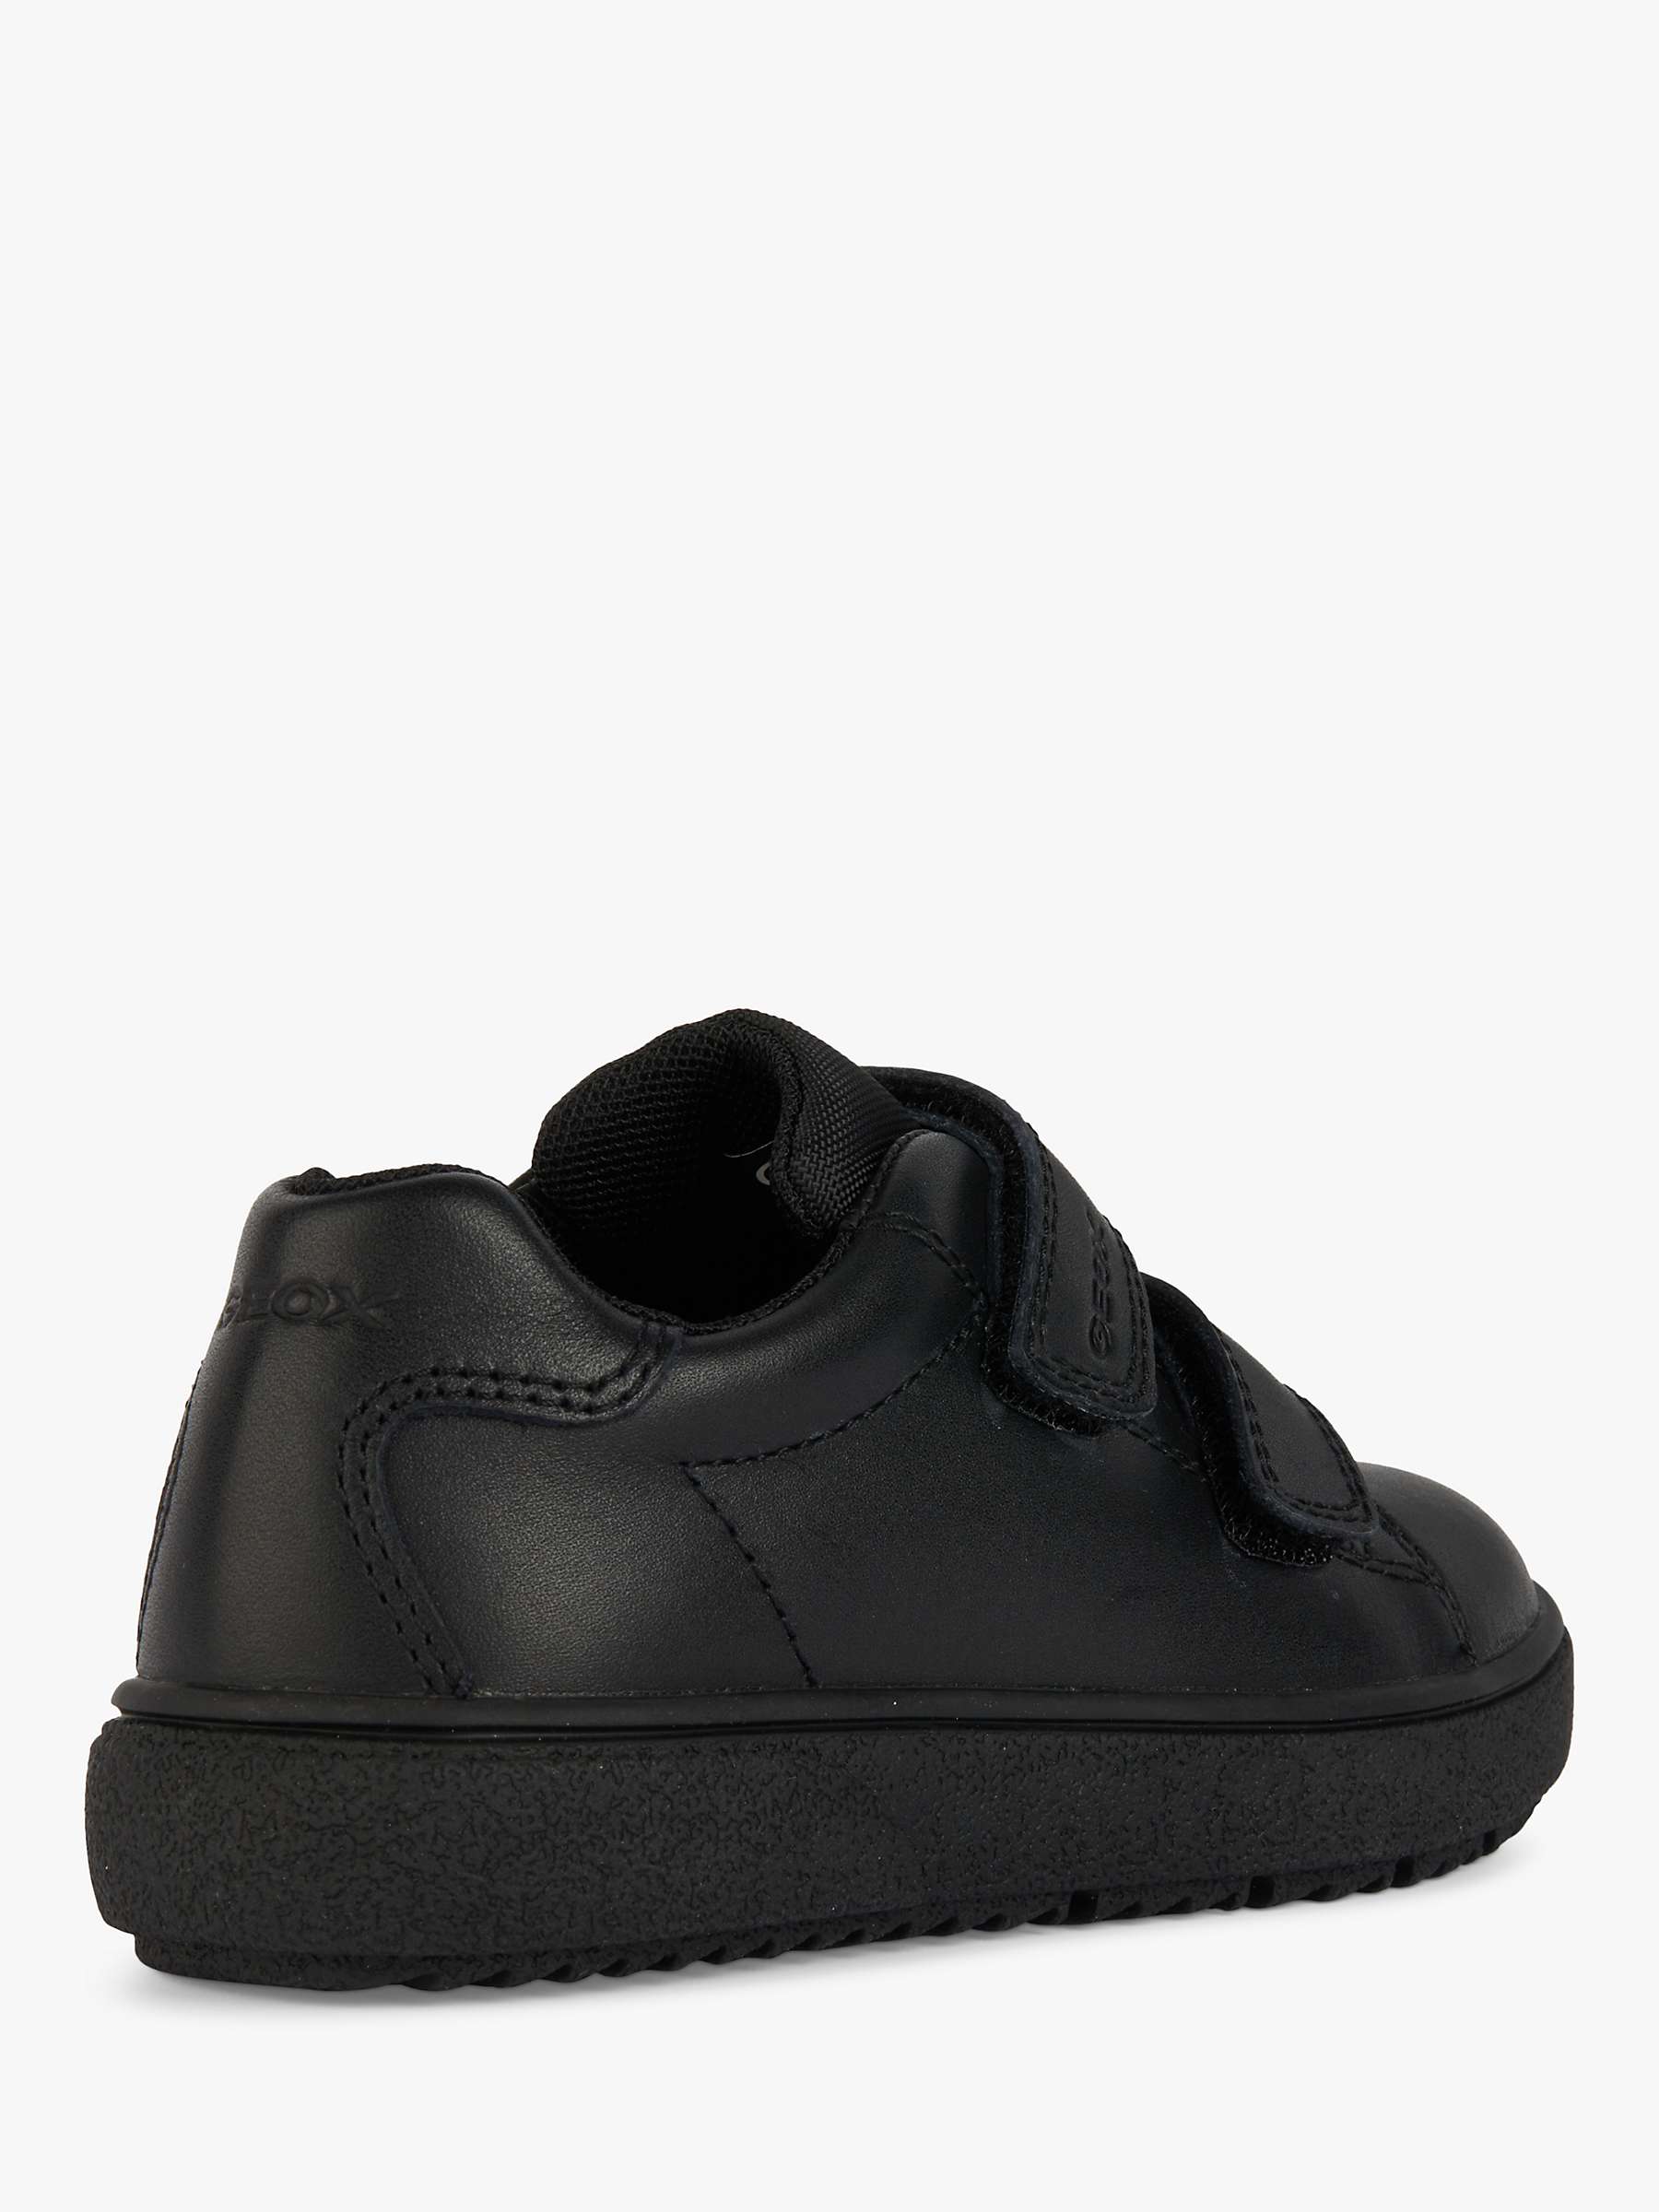 Buy Geox Kids' Theleven Low Cut School Shoes Online at johnlewis.com